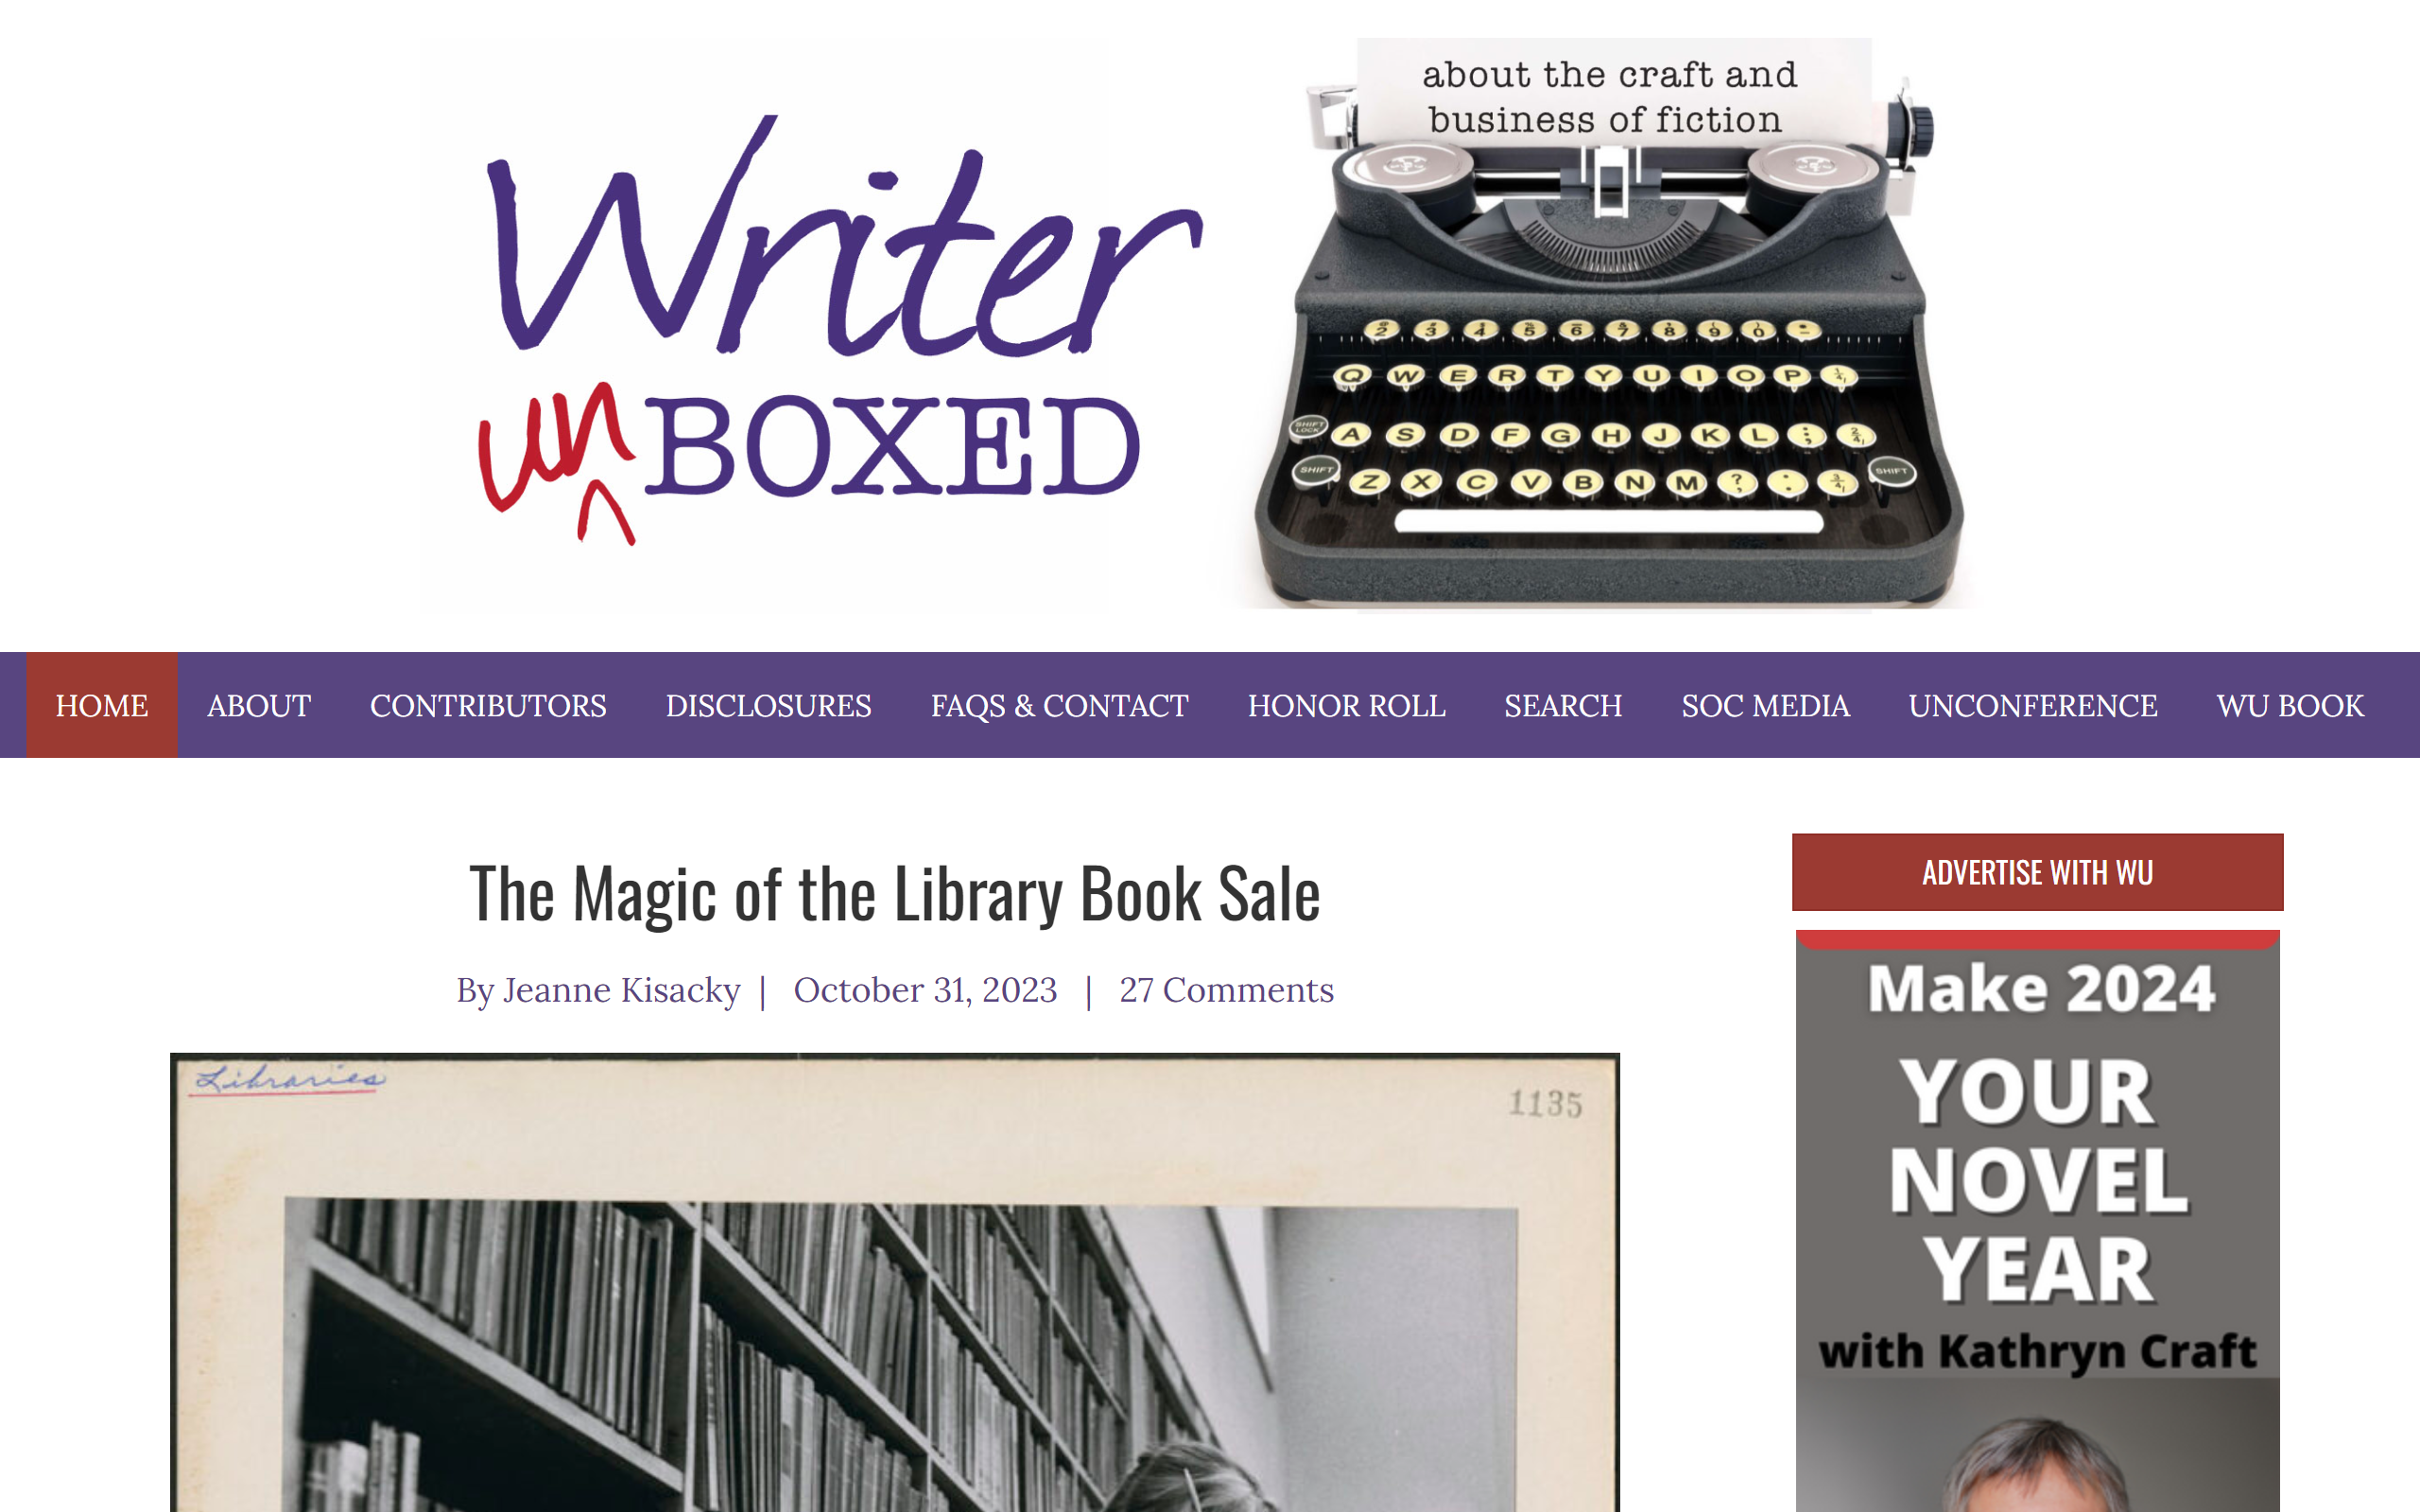 Writer Unboxed Websites for Writers